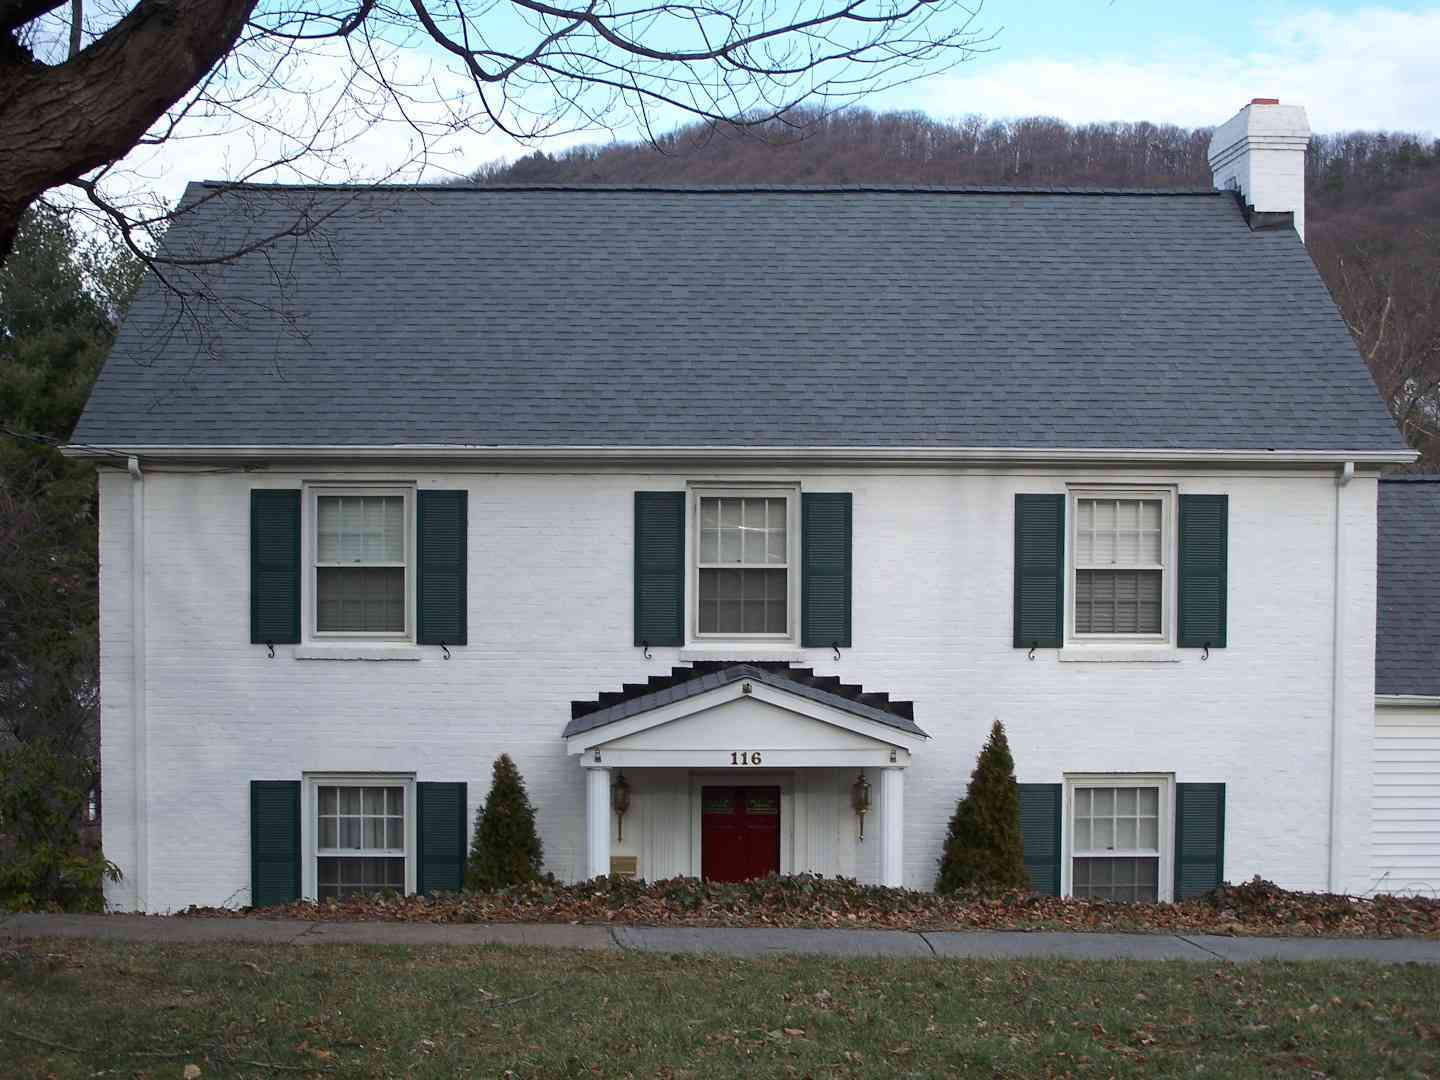 A white single family residential home with a dark gray roof